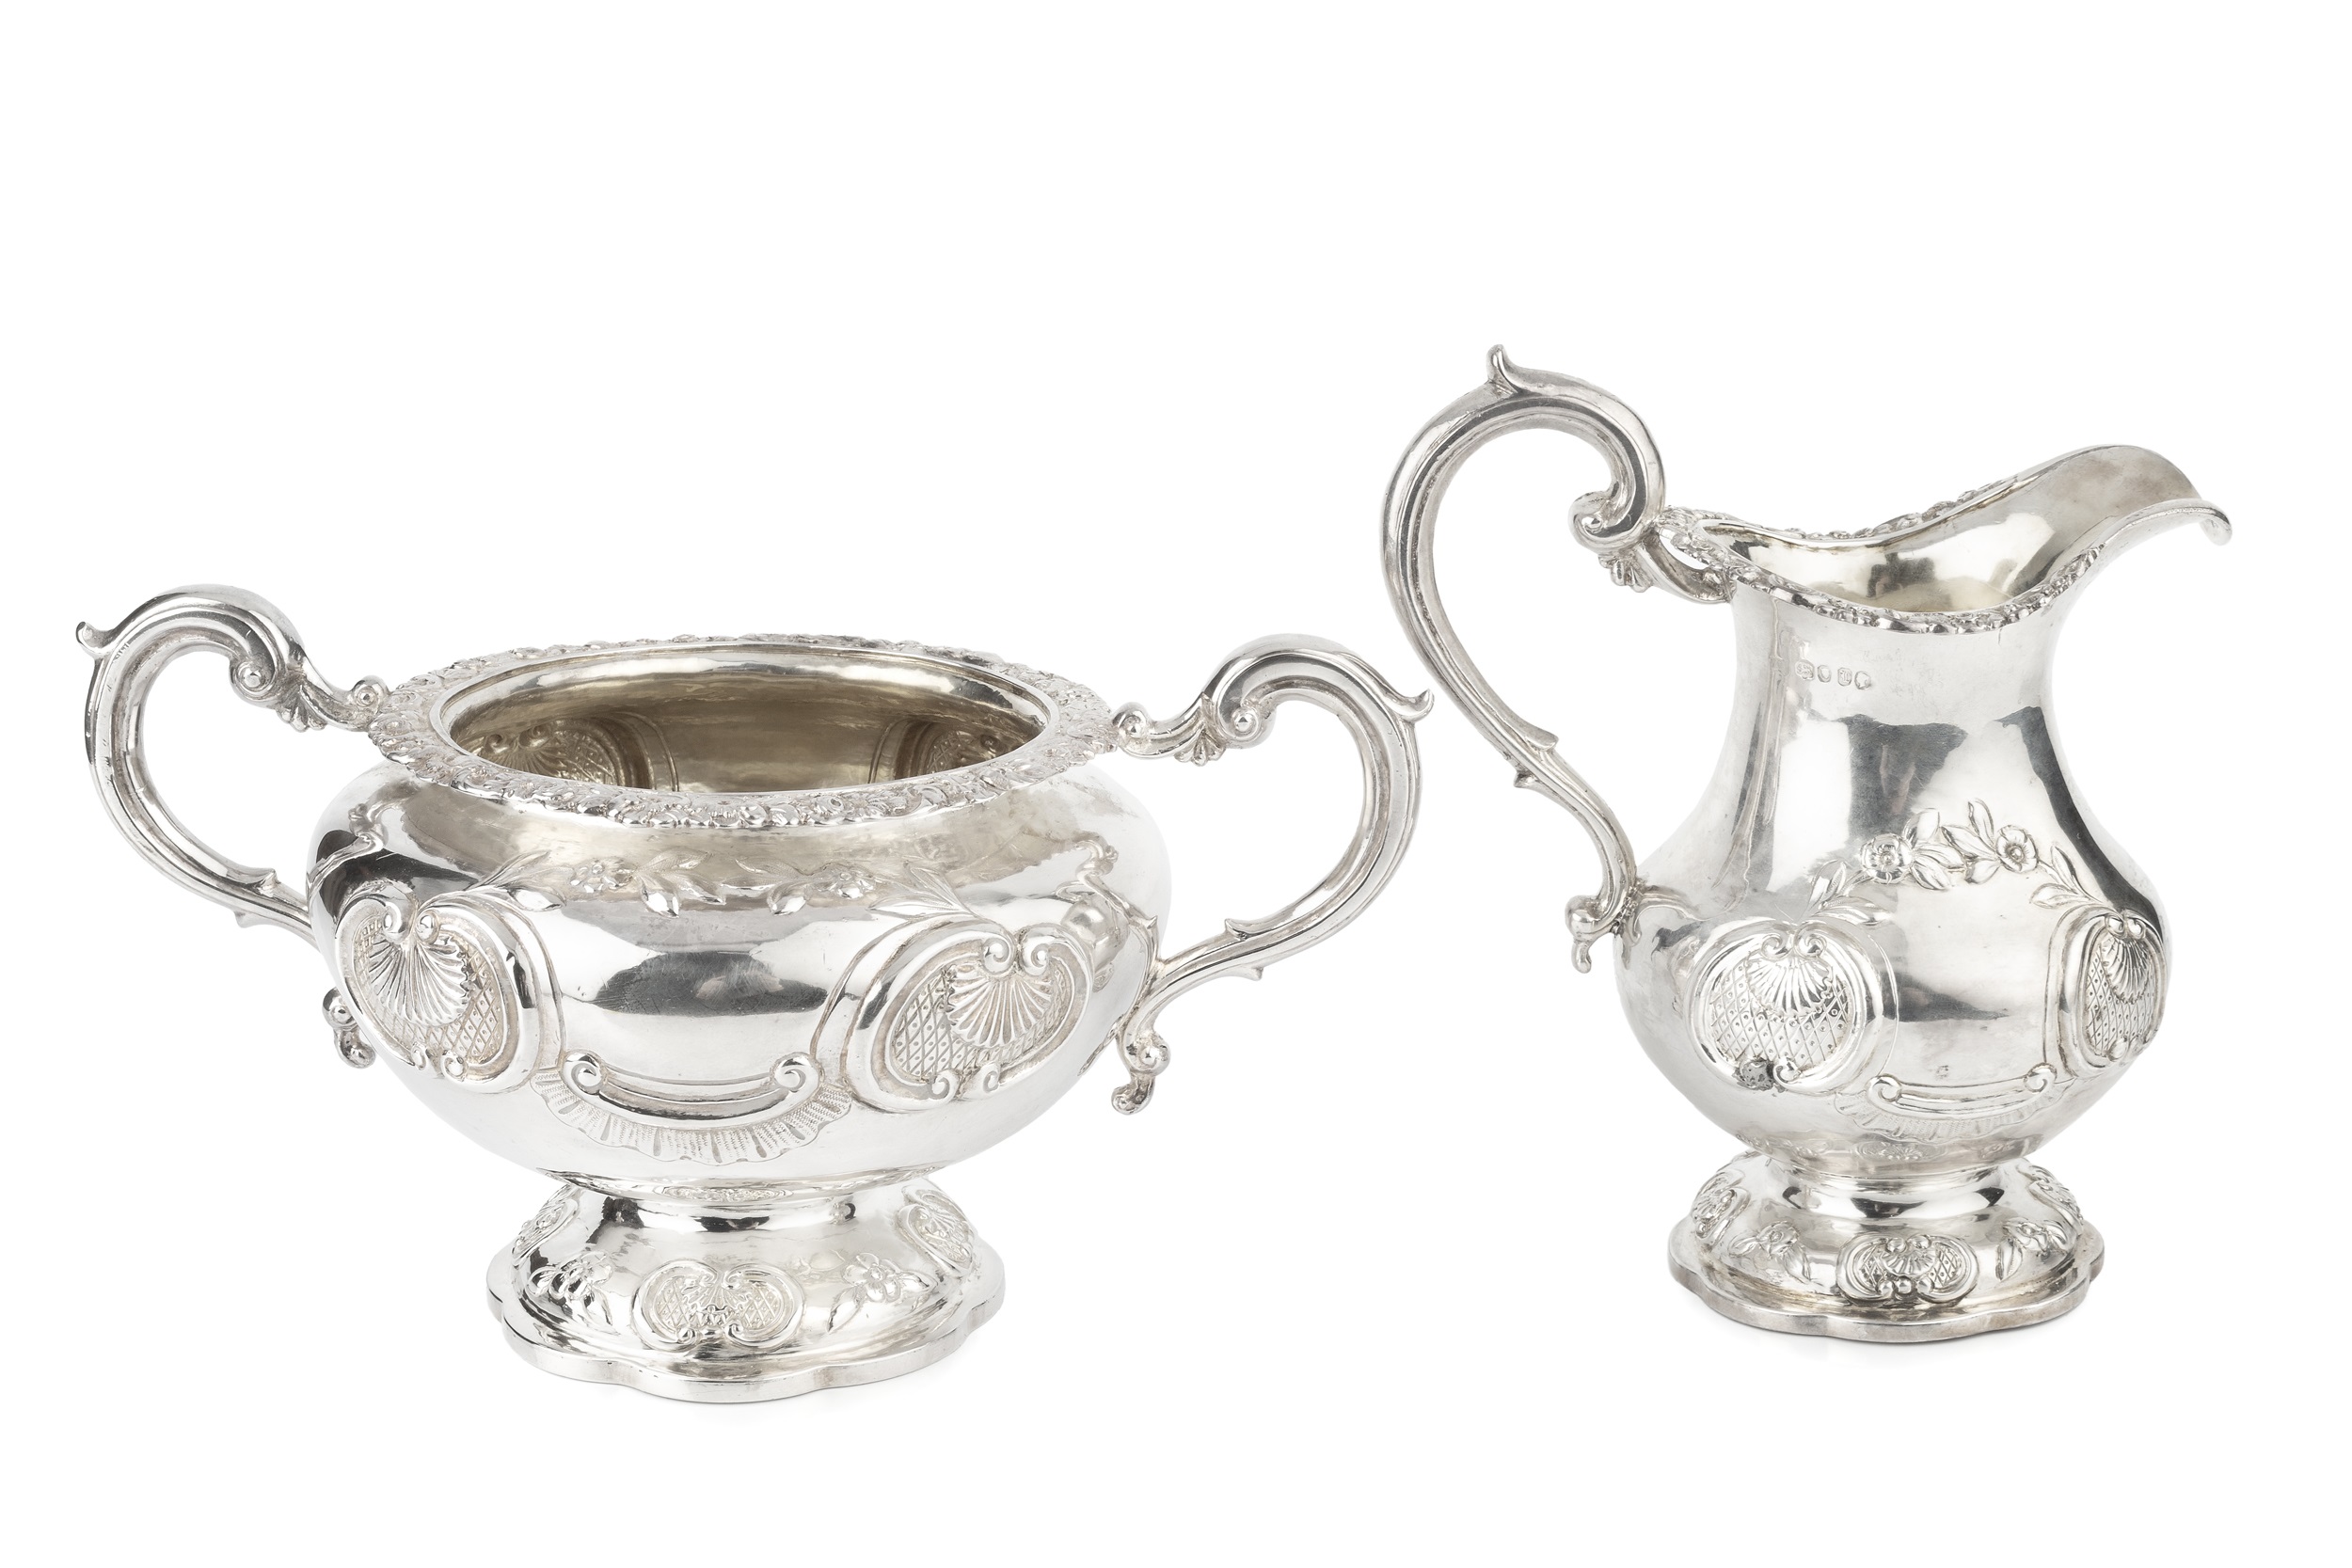 An early Victorian silver twin handled sucrier, and matching milk jug, with floral, scallop and C-